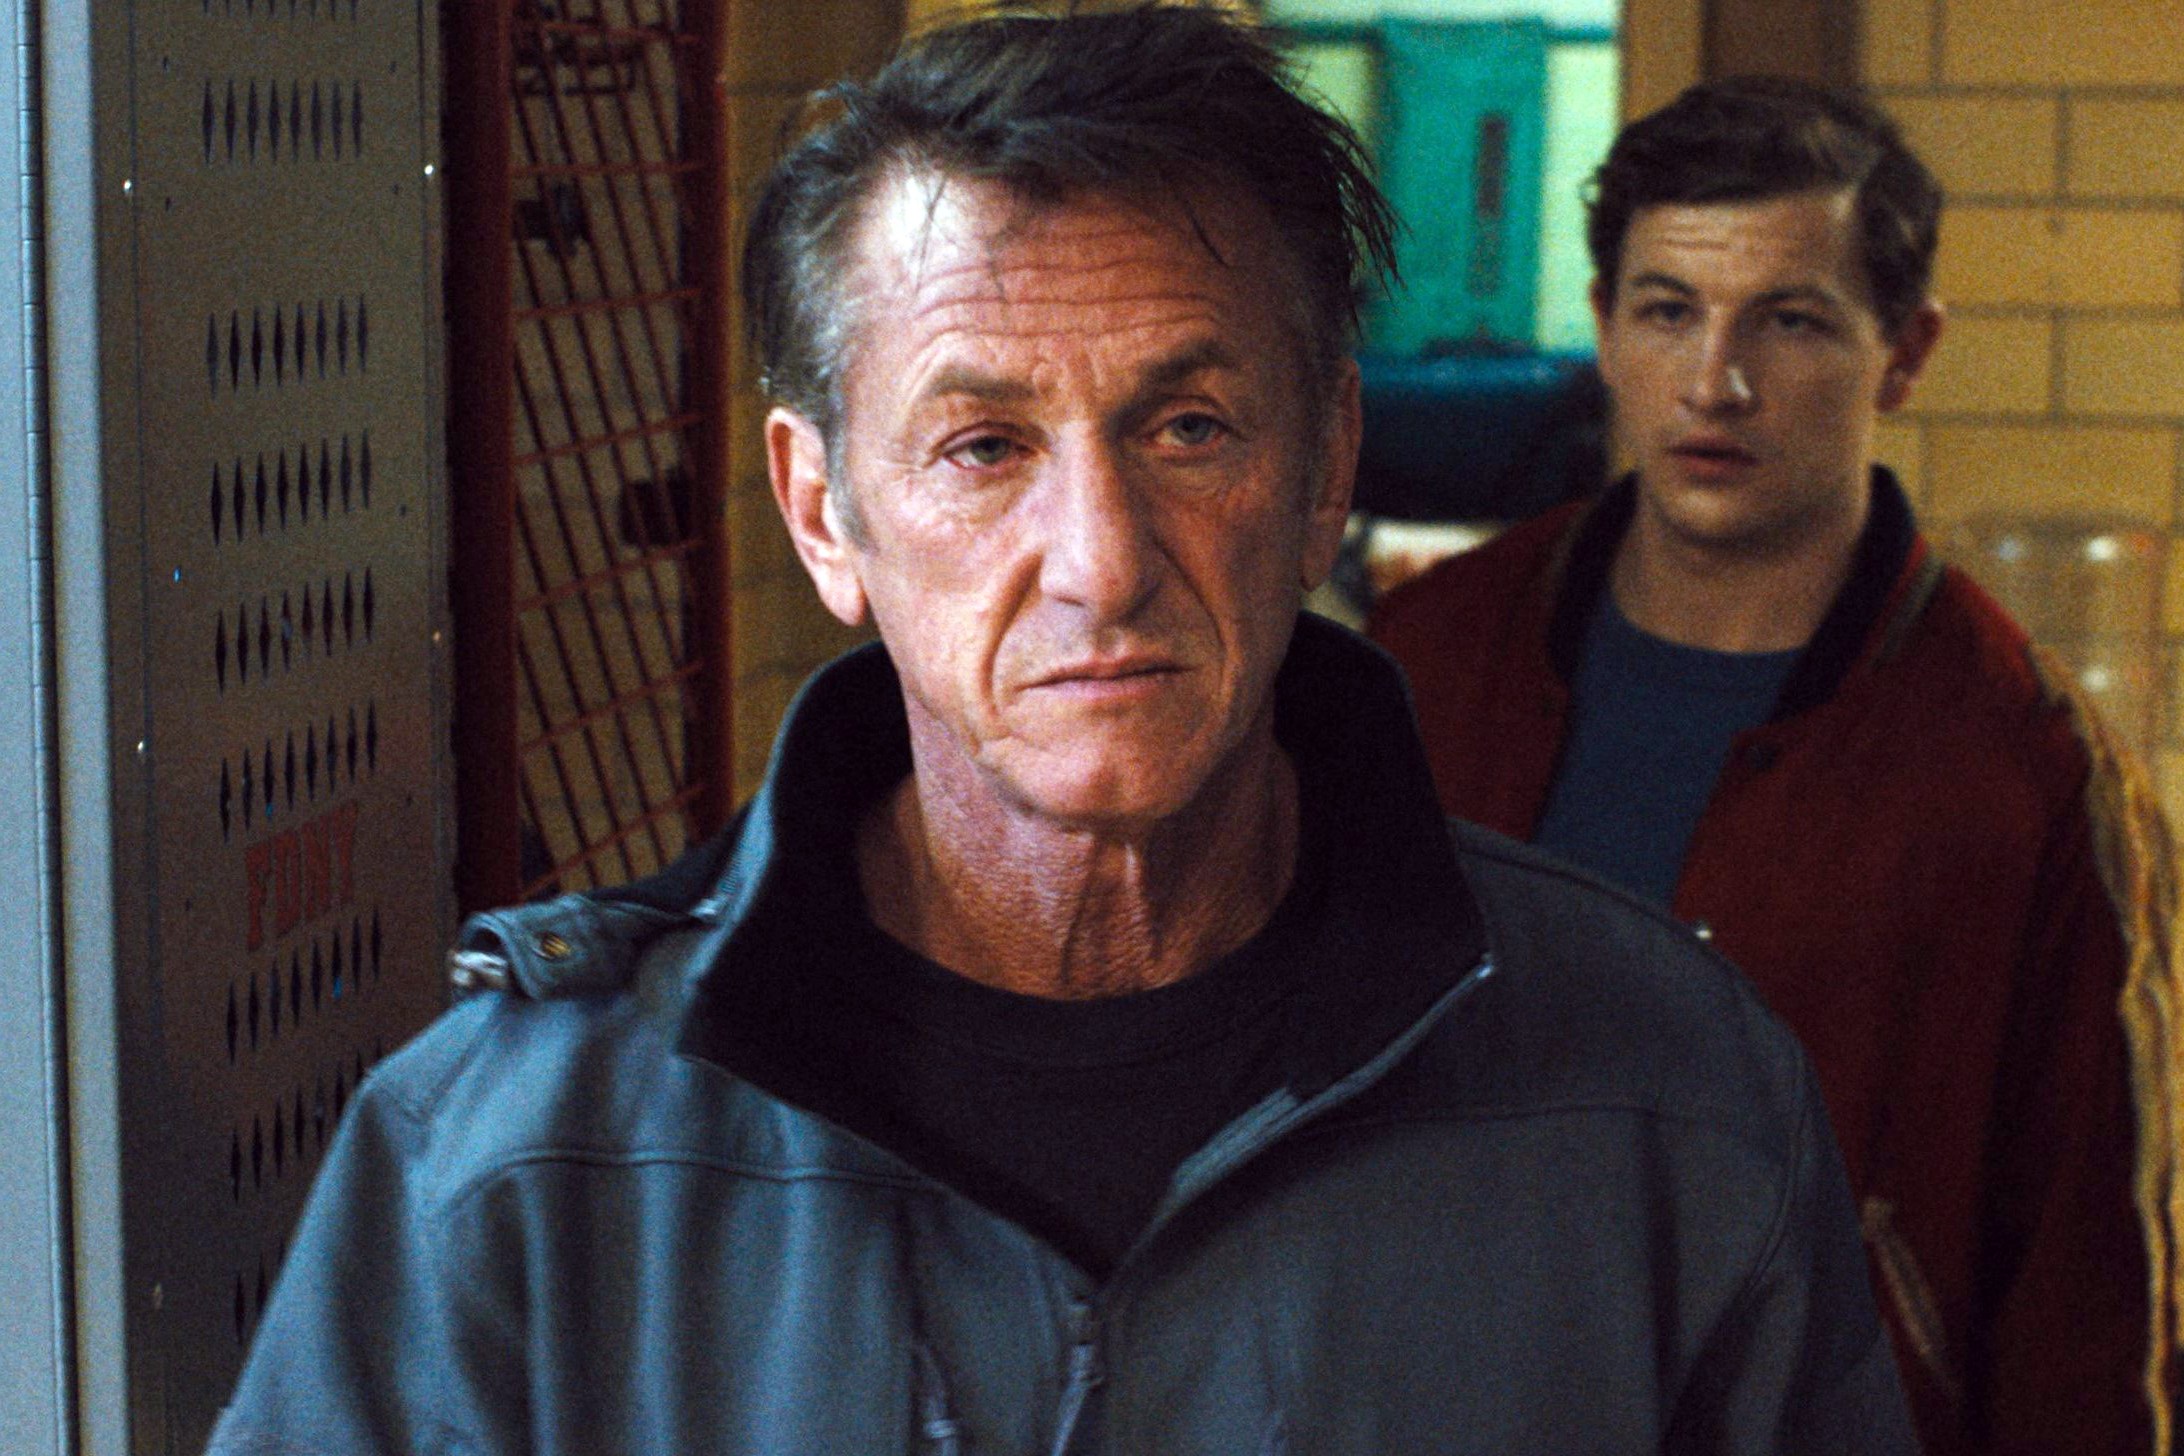 Sean Penn dazzles in Black Flies, but there is too much going on